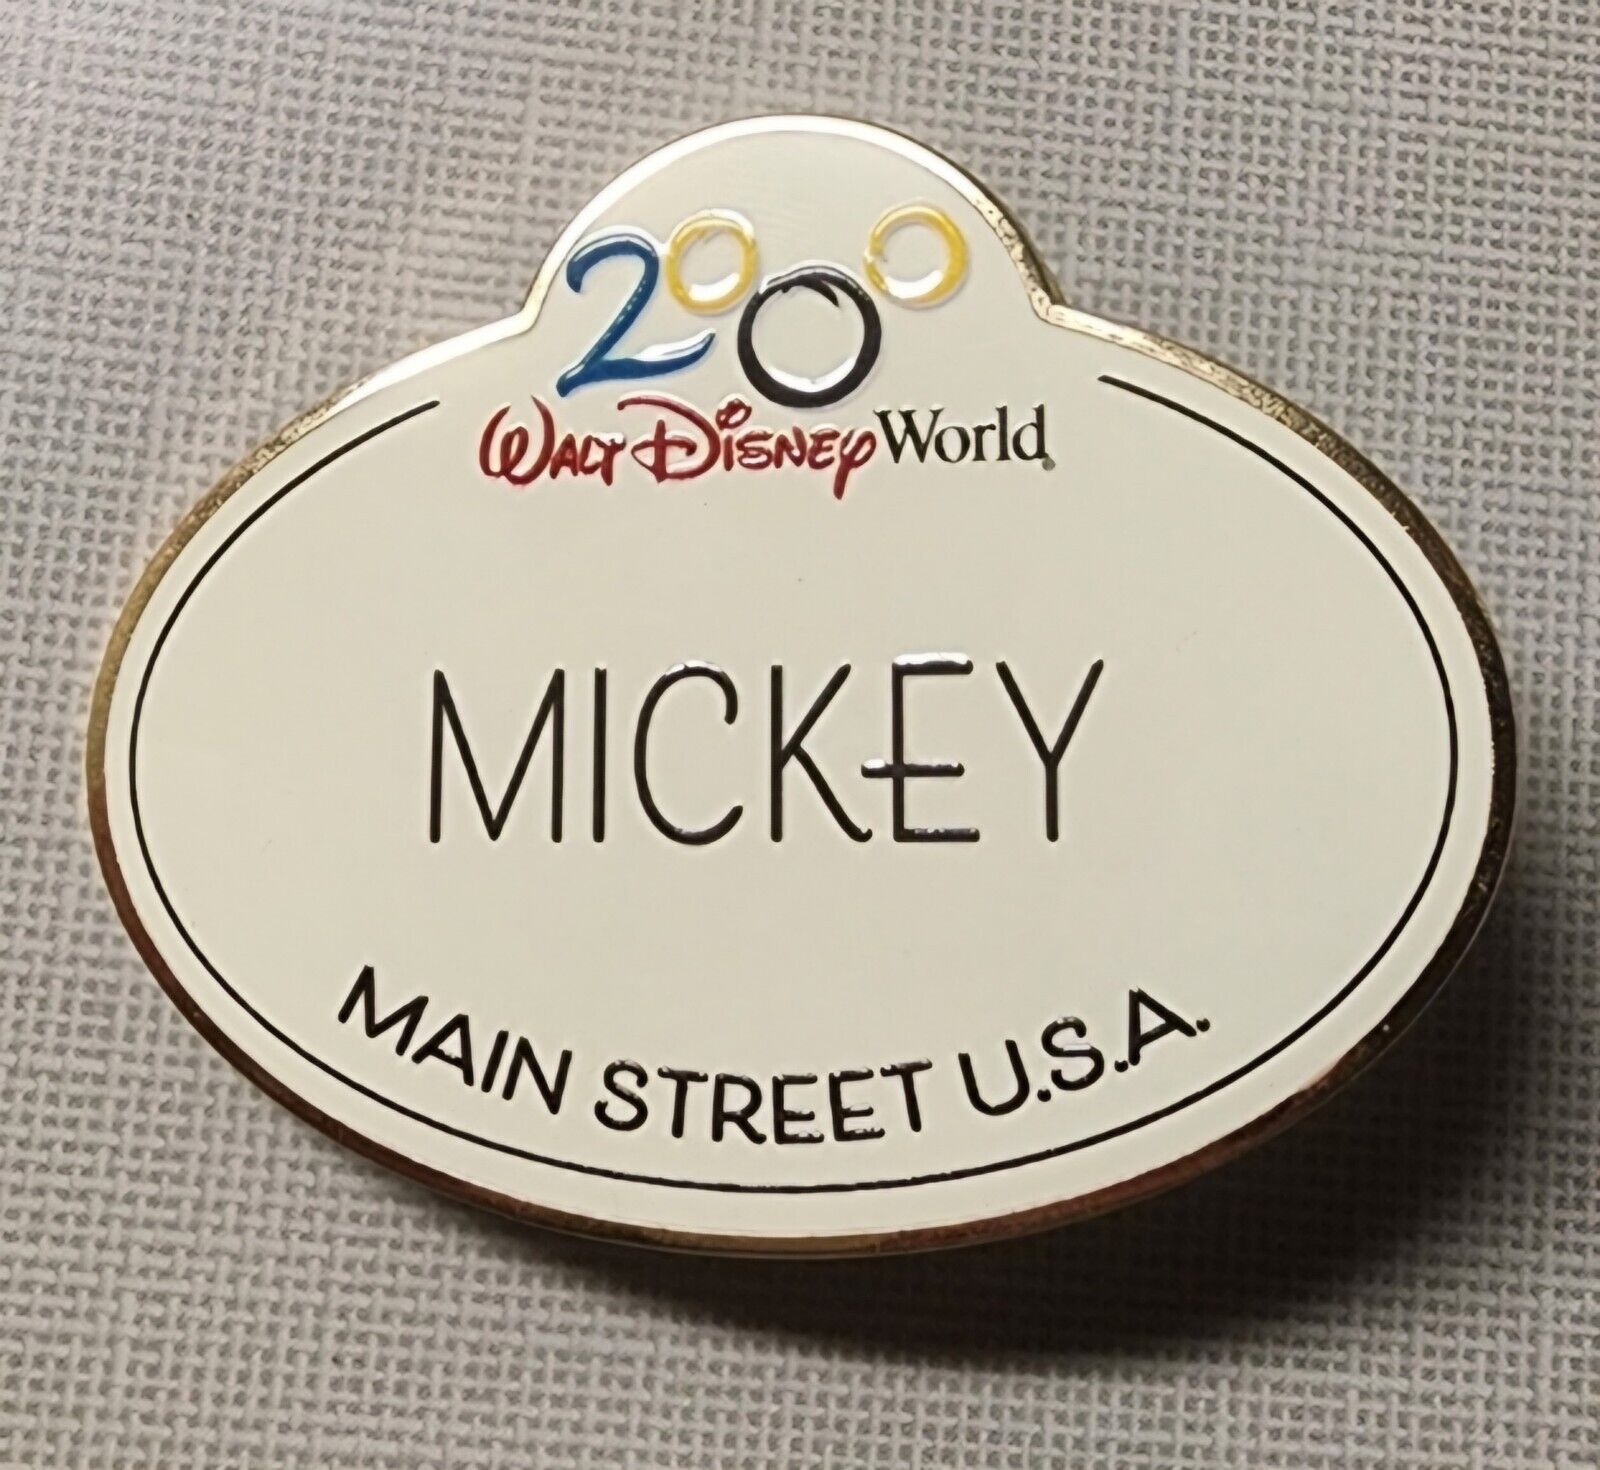  WDW 50th Disney Cast Member LE 600 Pin  Mickey Year 2000 Name Tag